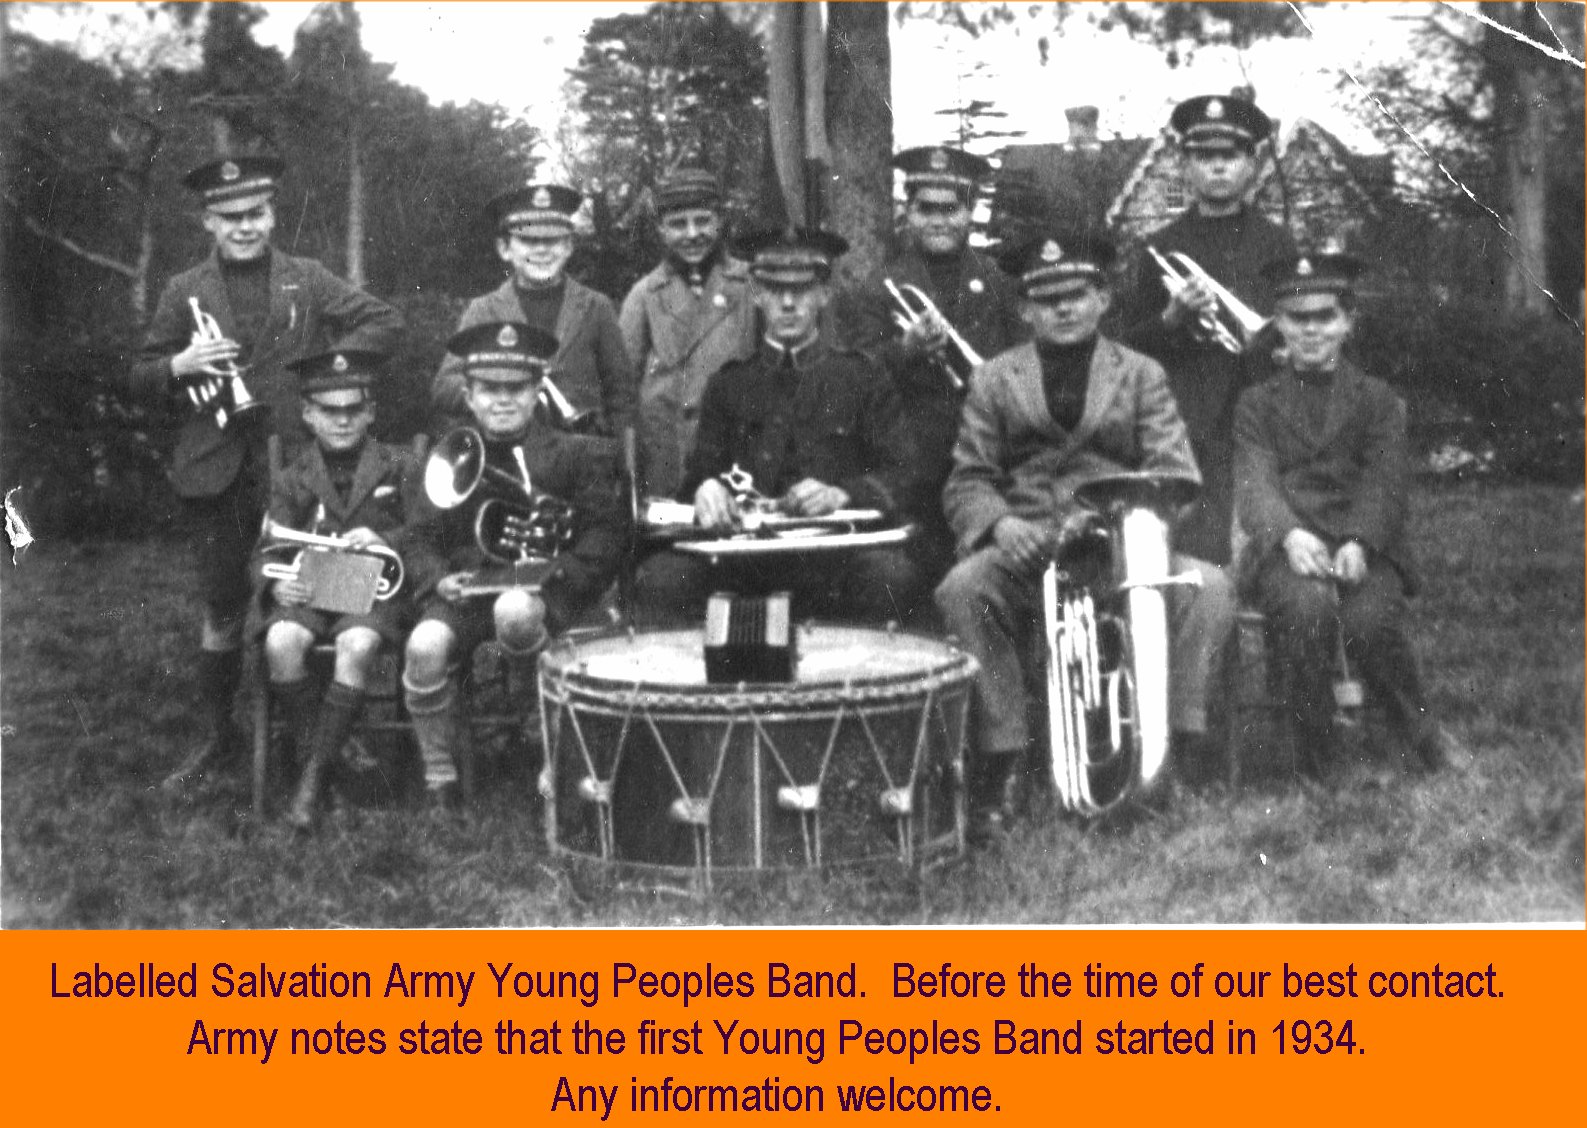 WESTBOURNE HISTORY PHOTO, SALVATION ARMY, YOUNG PEOPLES BAND